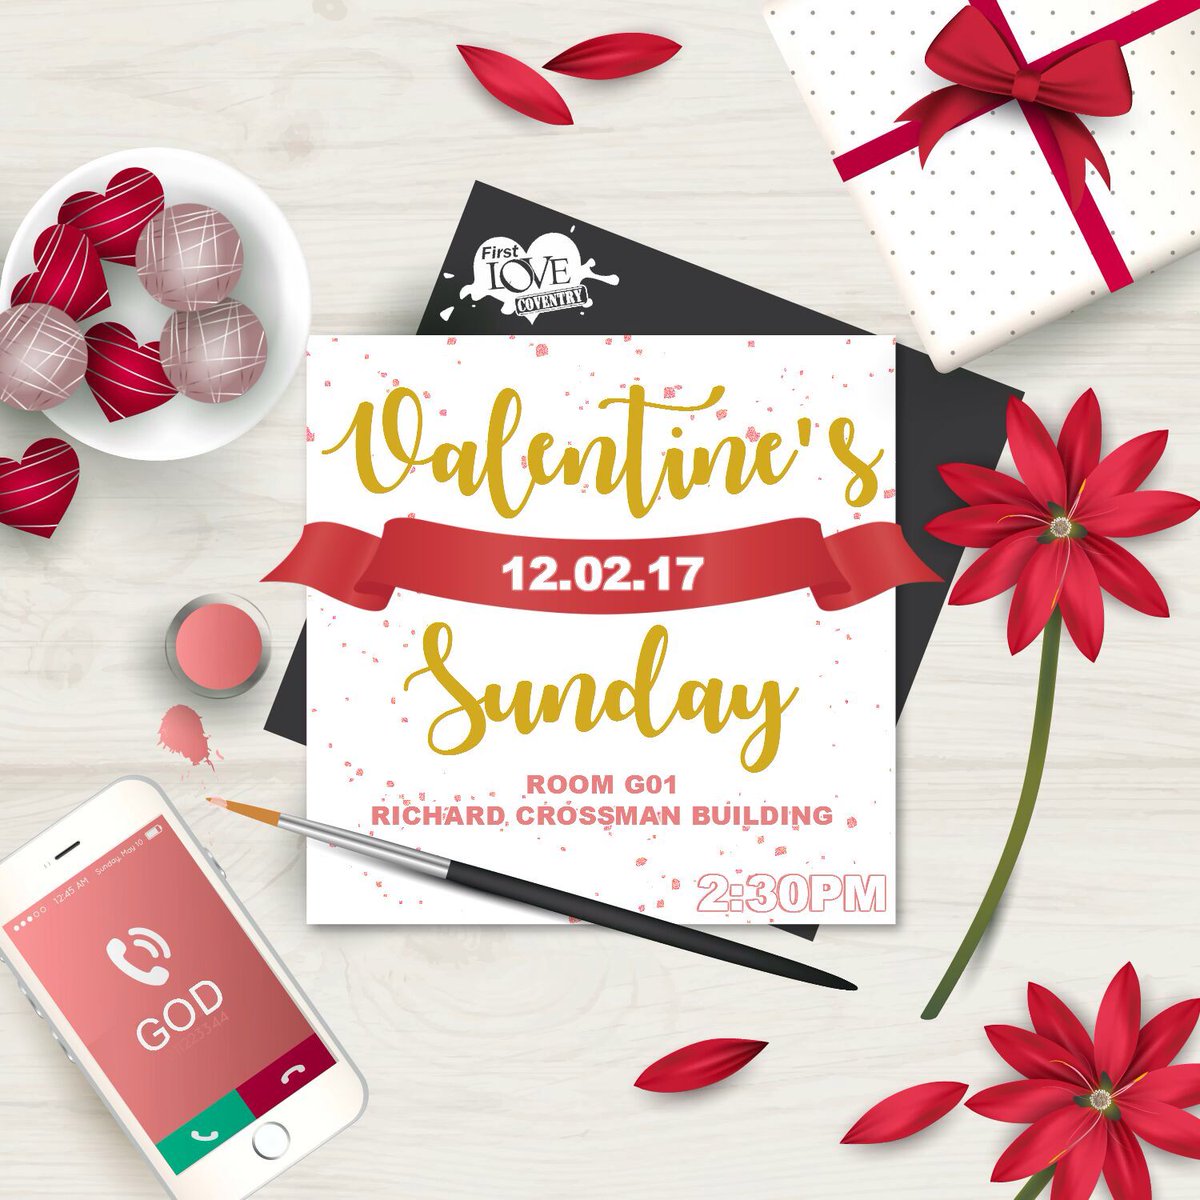 💕🌹 It's almost time for our Valentine's Sunday special!! 🌹💕

You really do not want to miss it! 💃🎉💥🎉✨

#TheBestPlaceToBe 
#Tomorrow
#FLCov